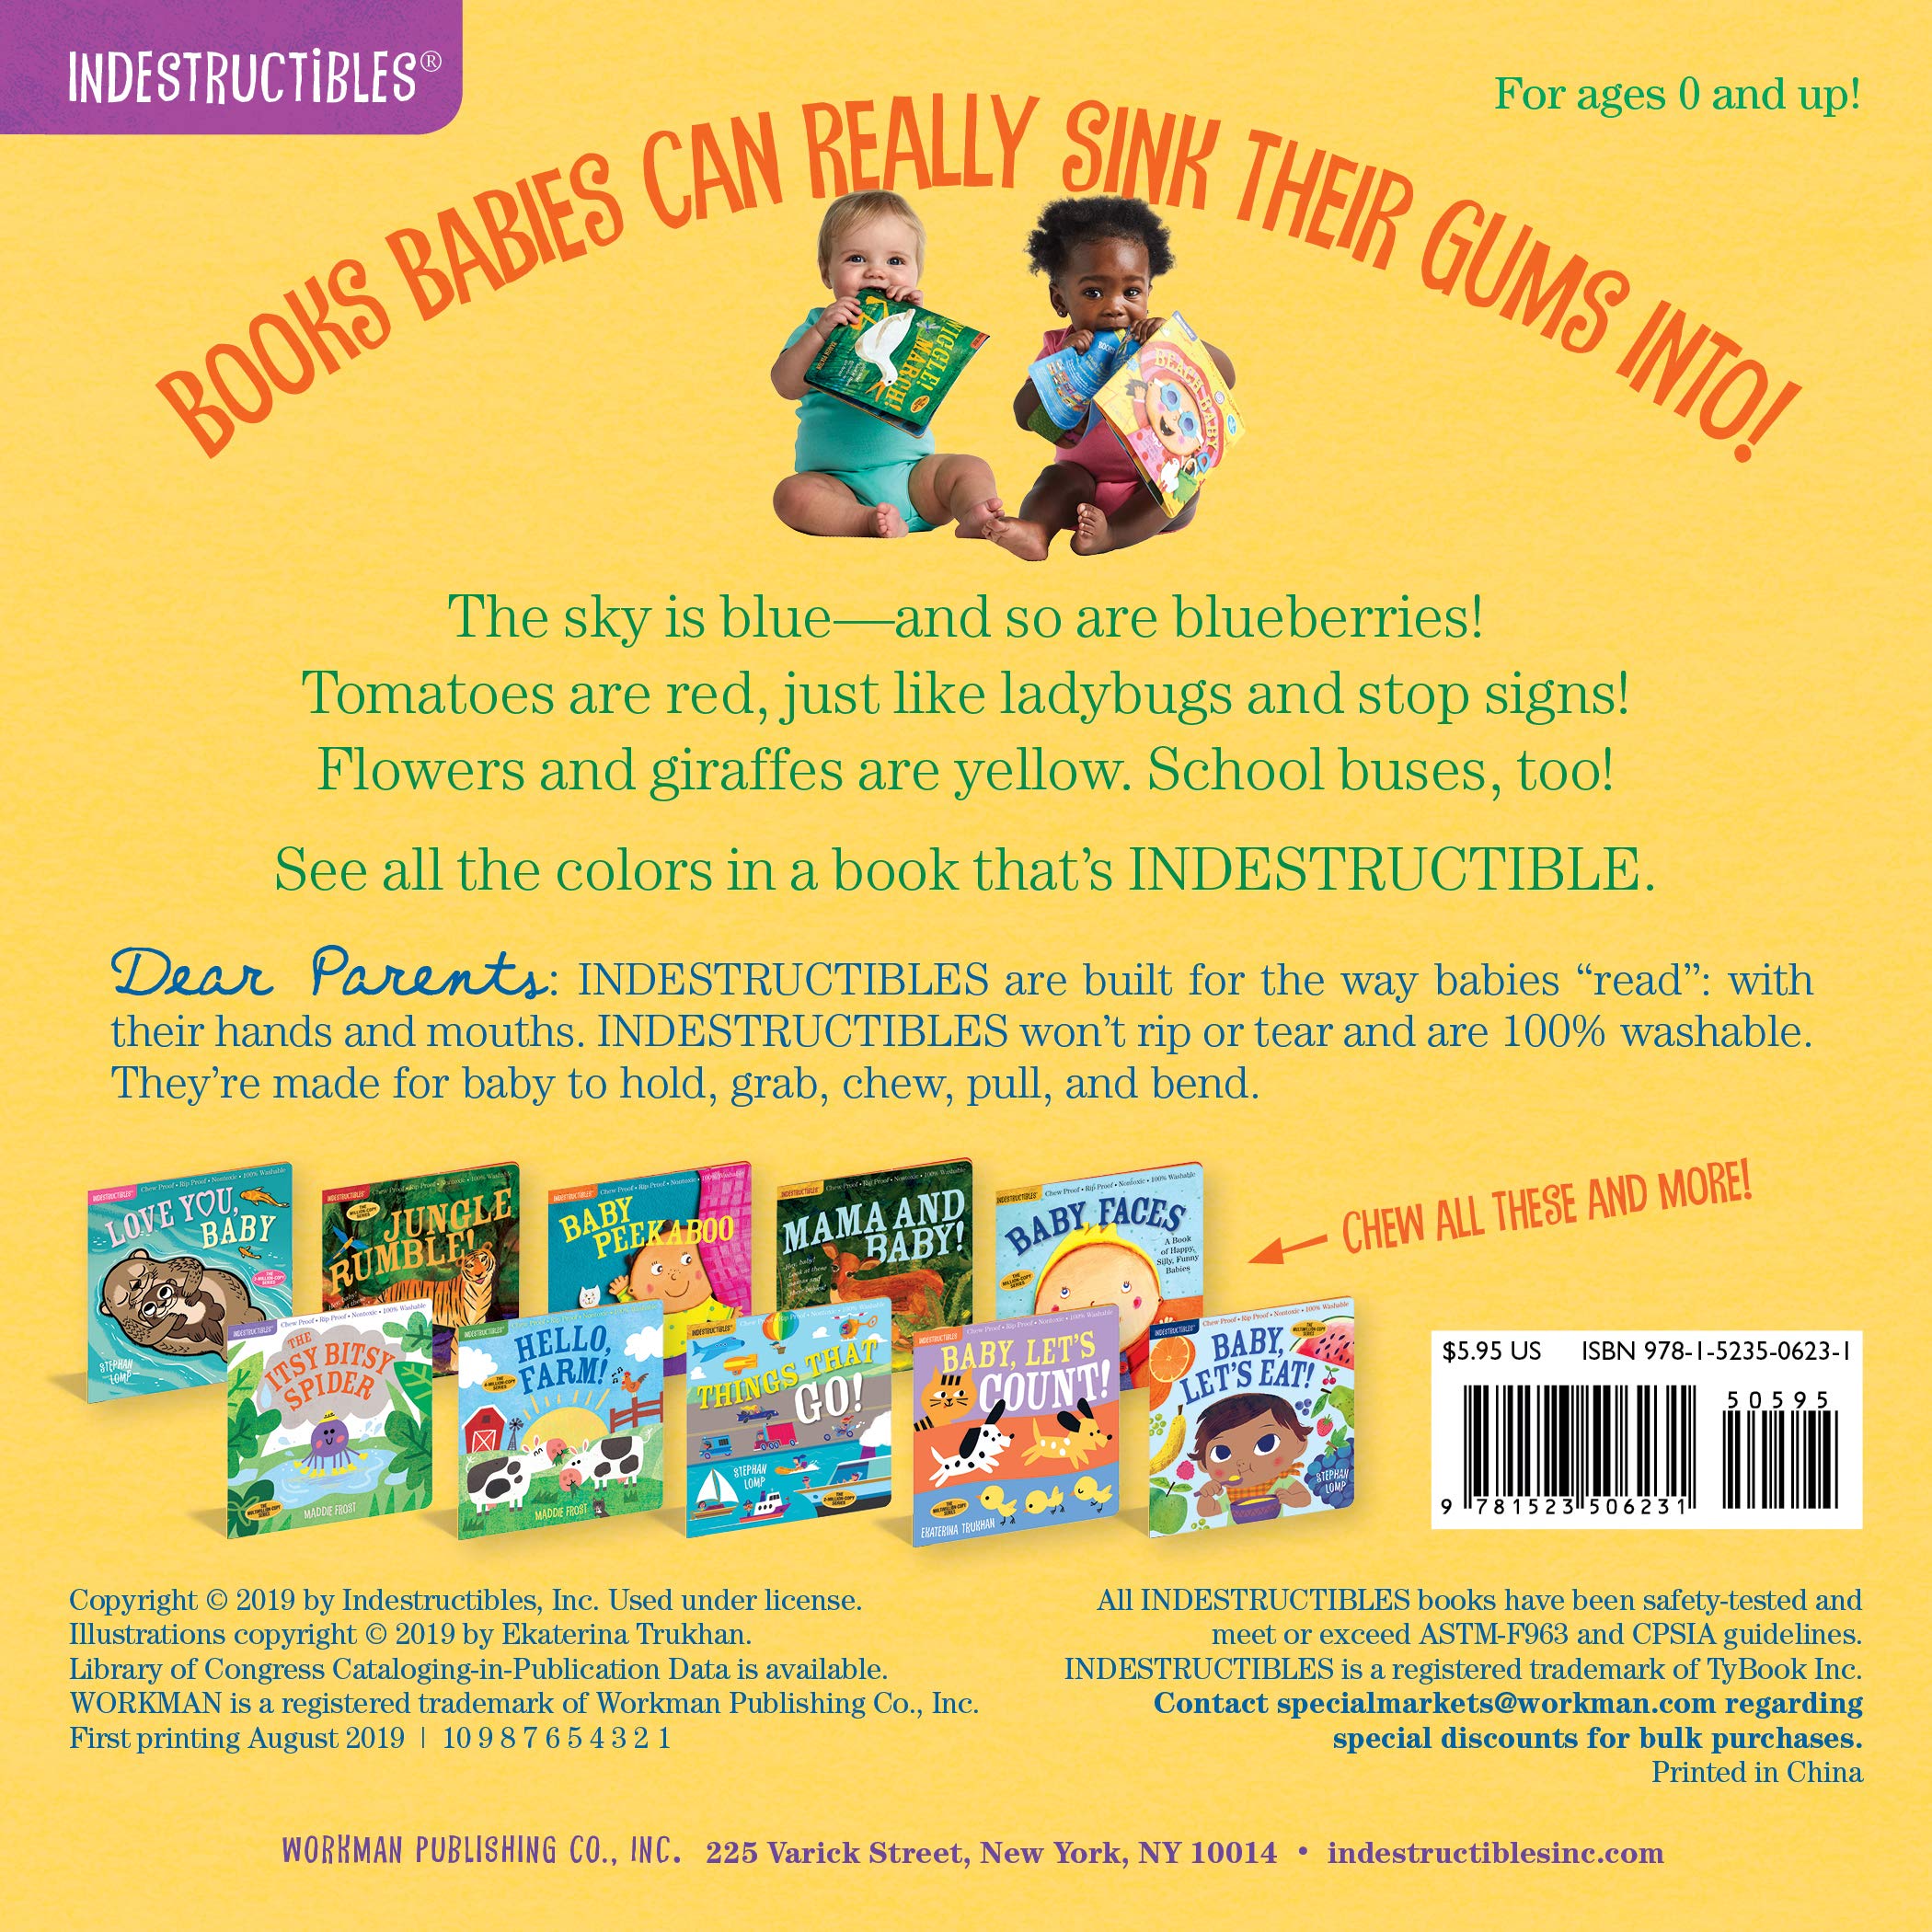 Indestructibles: Baby, See the Colors : Chew Proof Rip Proof Nontoxic 100% Washable (Book for Babies, Newborn Books, Safe to Chew) (Indestructibles)